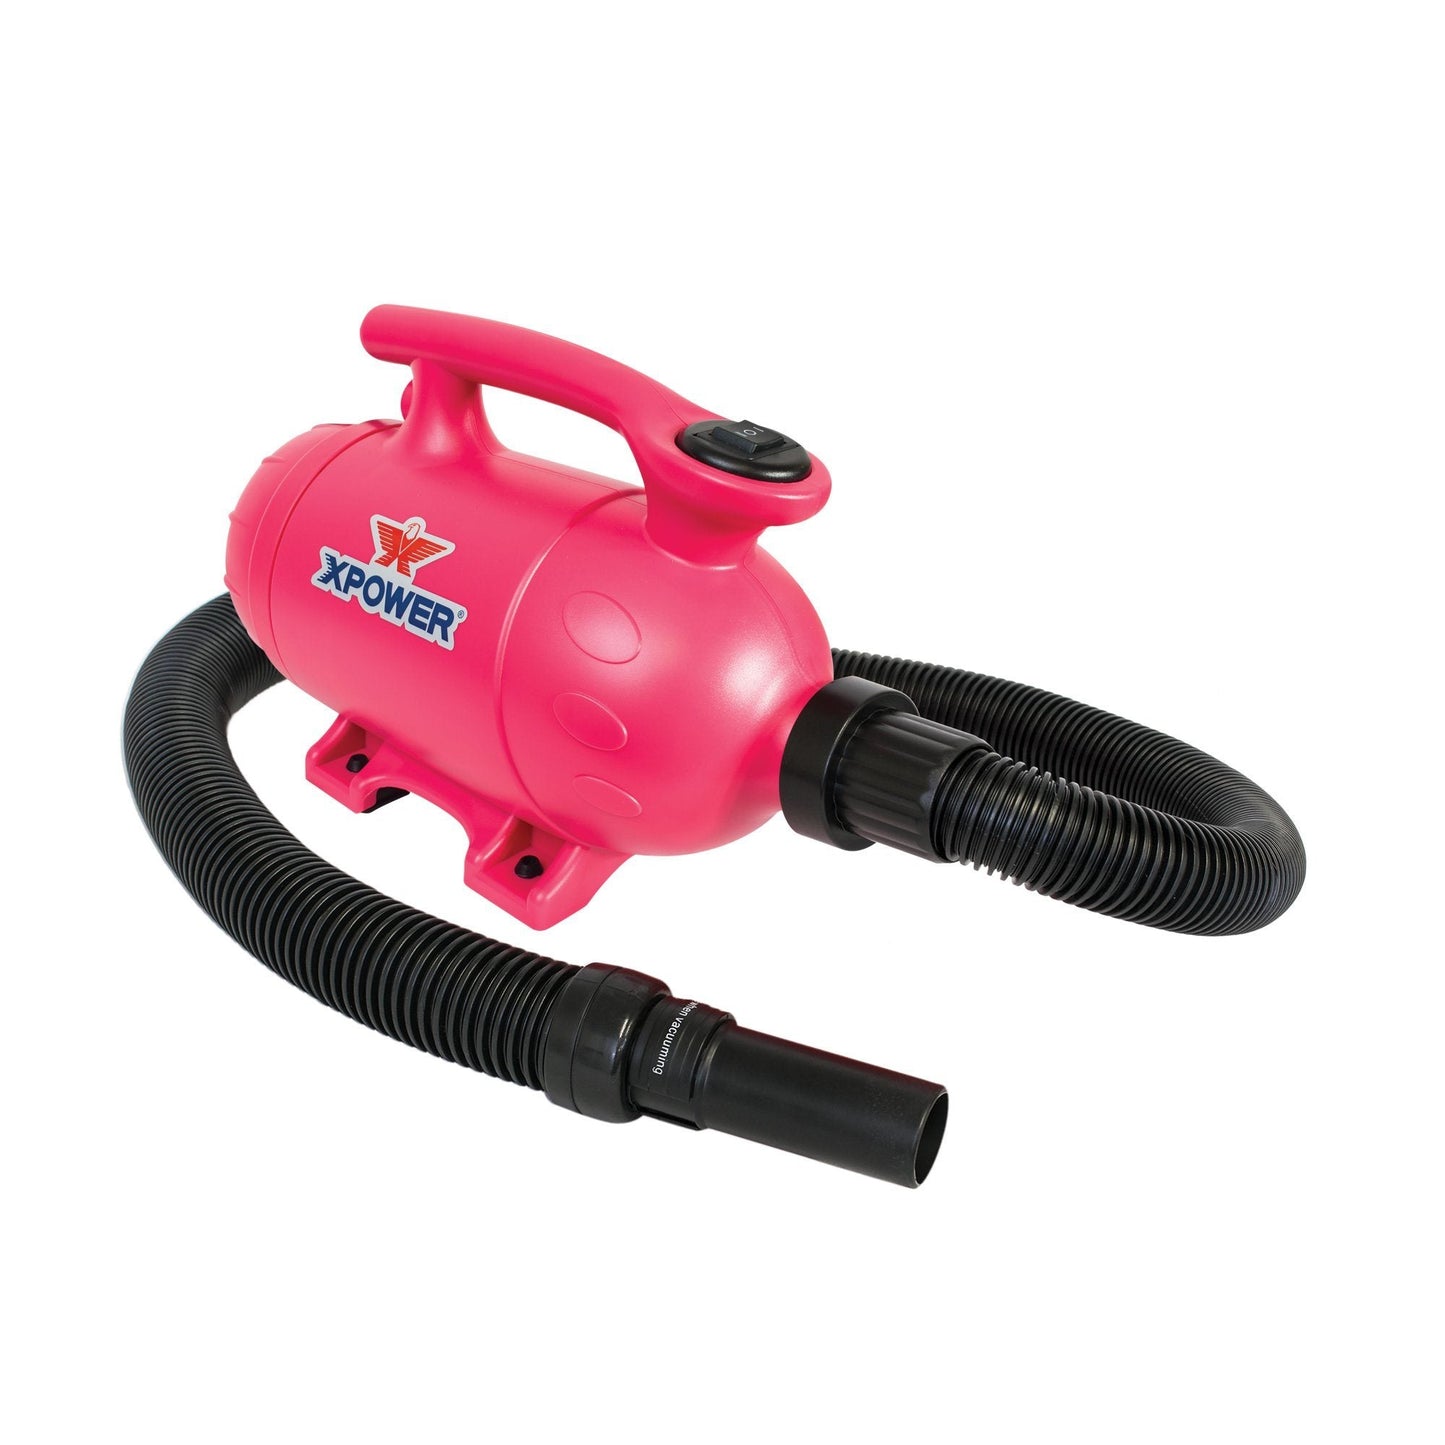 XPOWER B-2 Pro at Home Pet Grooming Dog Force Hair Dryer and Vacuum-Dryers-Pet's Choice Supply